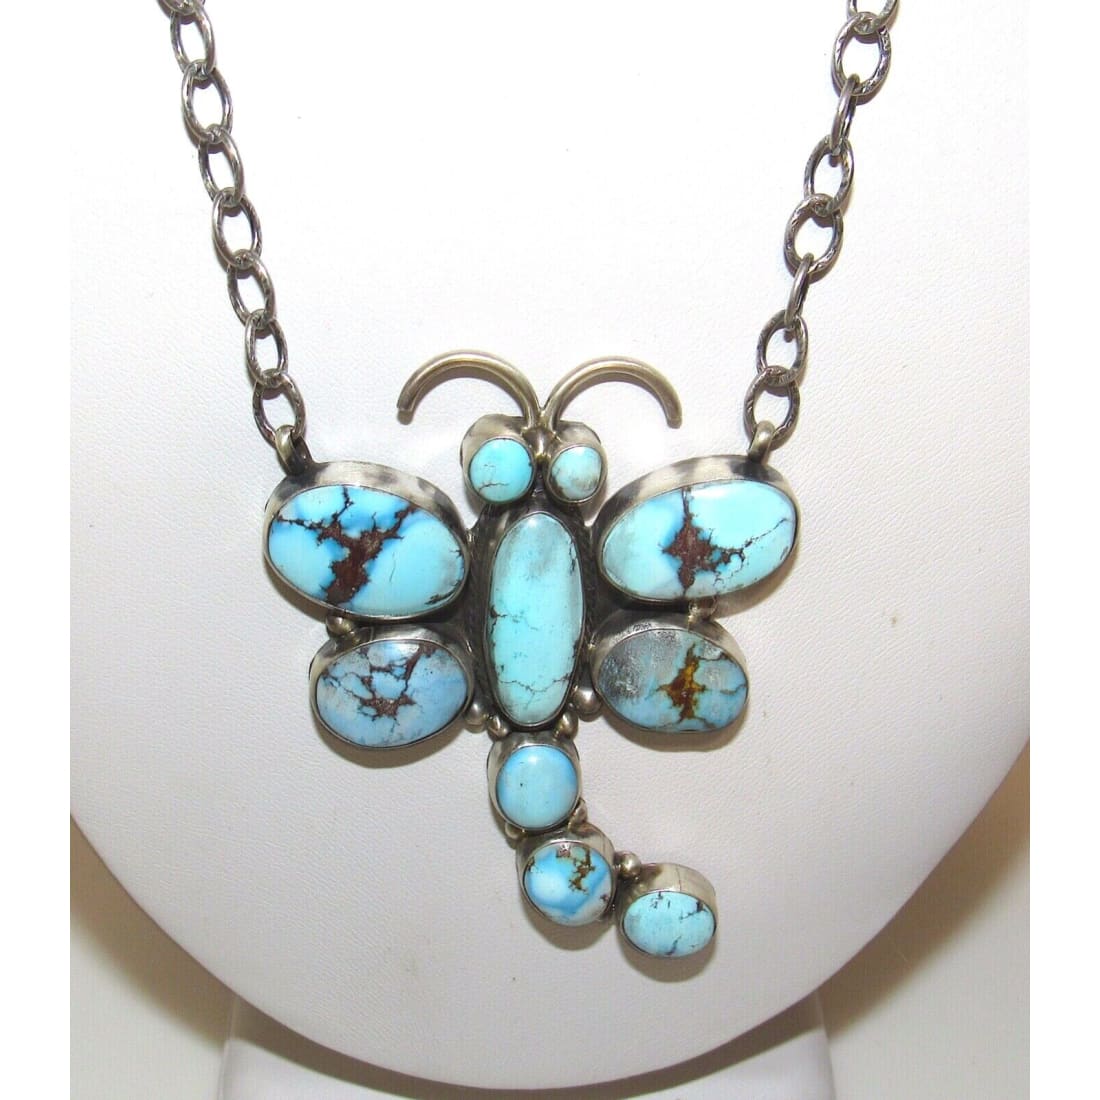 Huge Navajo Dragonfly Necklace Golden Hills Turquoise Sterling Silver Native Native American